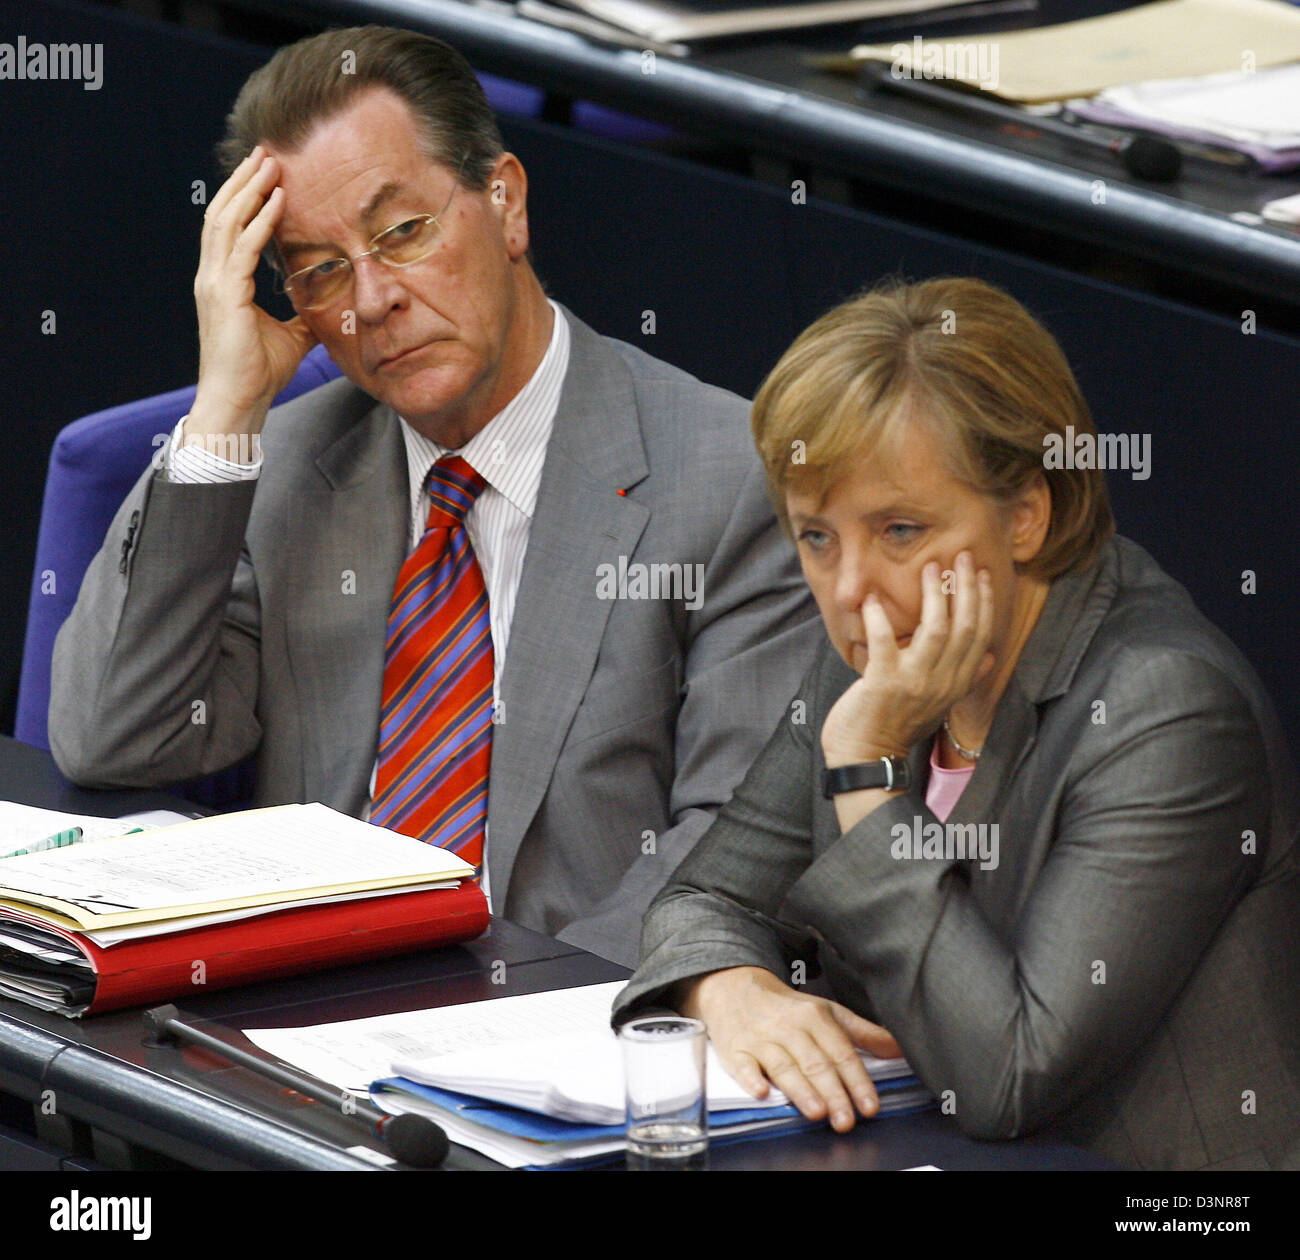 German Chancellor Angela Merkel (R) sits beside Federal Minister for Labour and Social Affairs Franz Muentefering during a German Bundestag budget debate in Berlin, Germany, Thursday, 22 June 2006. Photo: Steffen Kugler Stock Photo